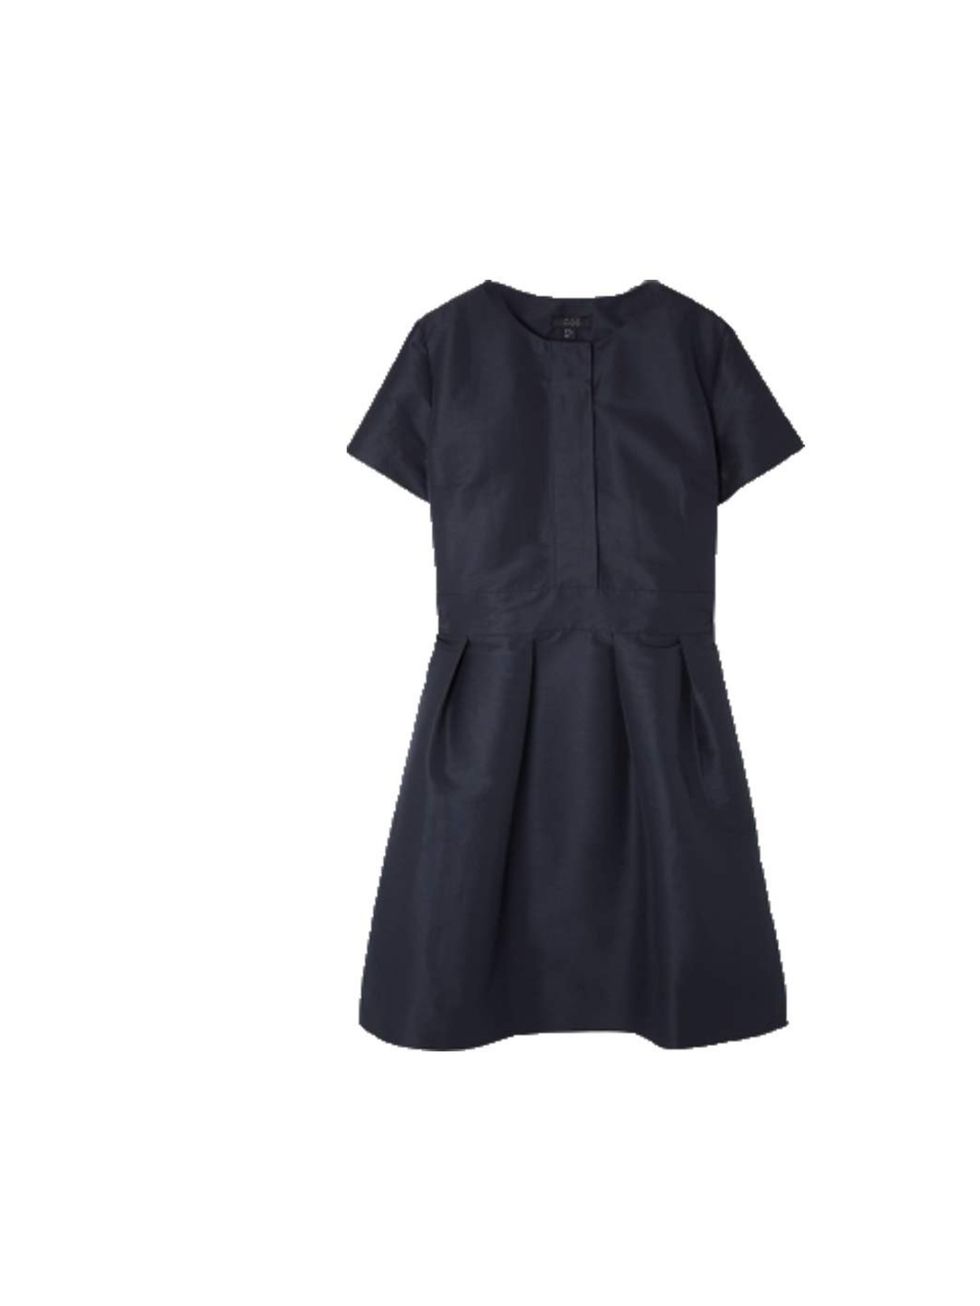 <p>This structured dress looks even better on. Add opaque tights and brogues for an understated spring look. </p><p><a href="http://www.cosstores.com/gb/Shop/Women/New/Crisp_technical_dress/365246-12670108.1">Cos</a> dress, £69</p>